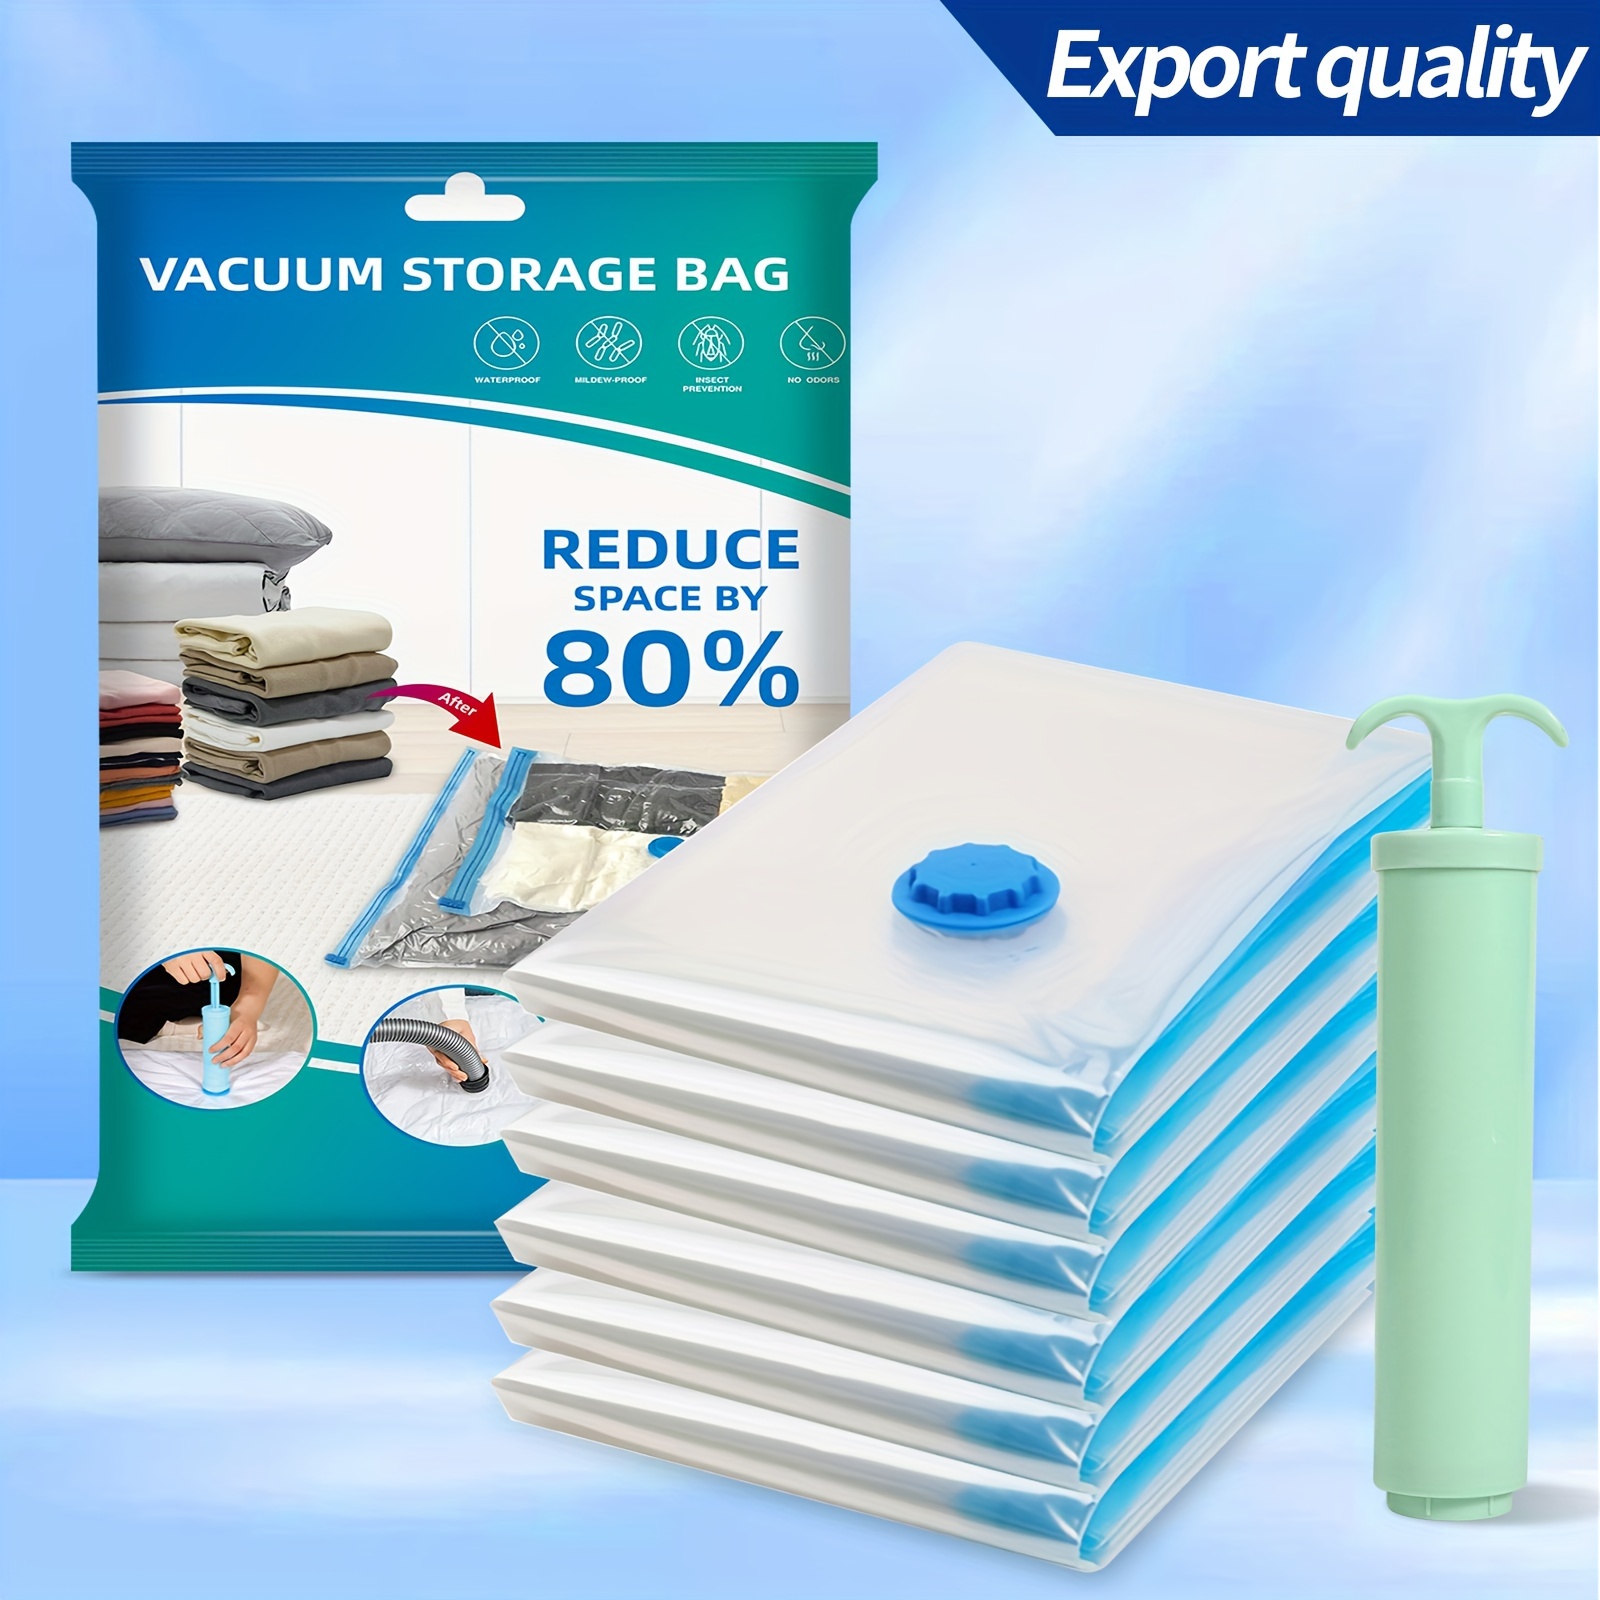 

6pcs Vacuum Compression Storage Bags, Dustproof Sealed Moving Bags For Clothes, Blankets, Shirts, Household Space Saving Organizer For Dorm, Closet, Wardrobe, Bedroom, Bathroom